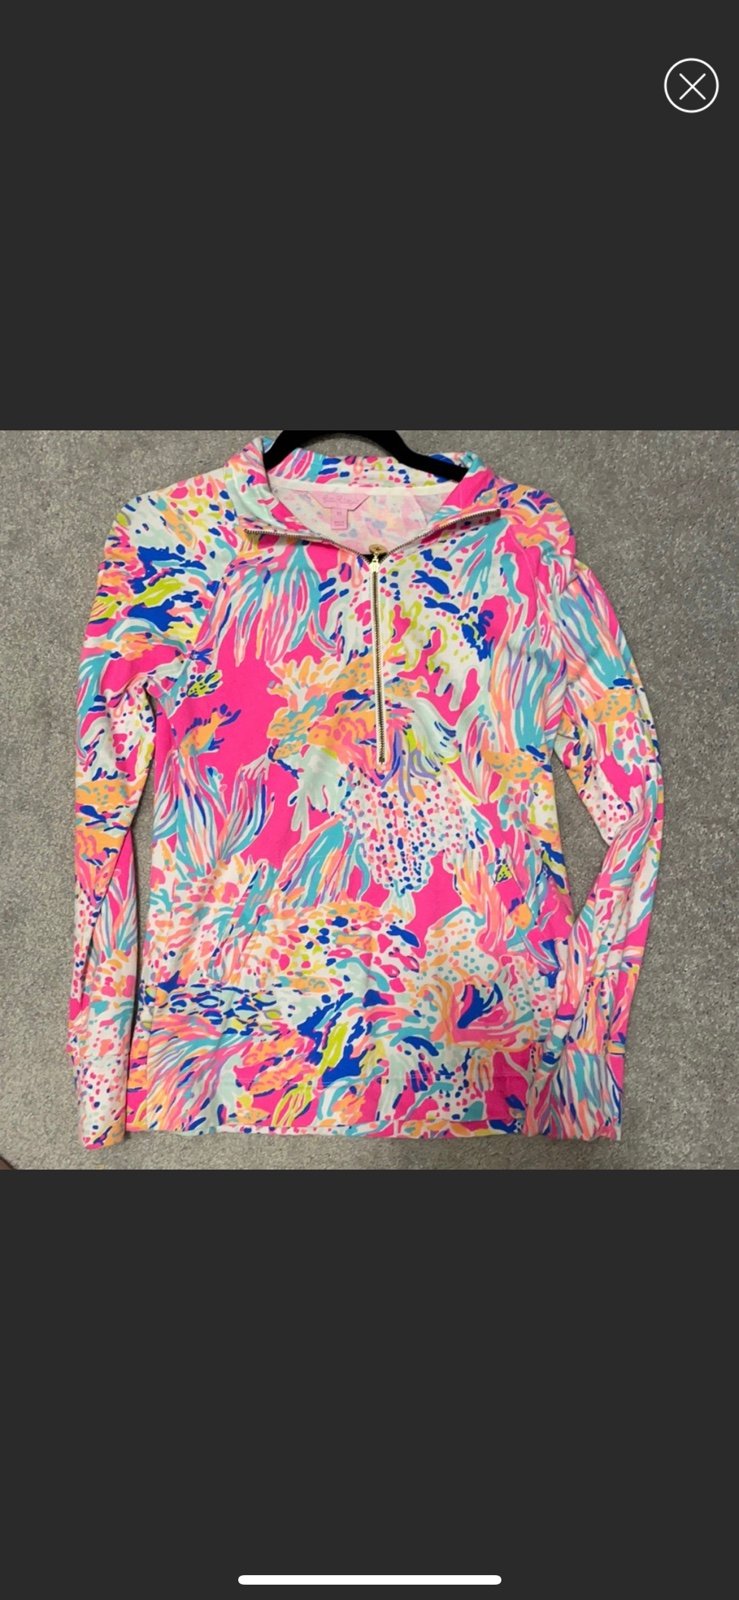 high discount Lilly Pulitzer popover IUWcZDkfk well sale